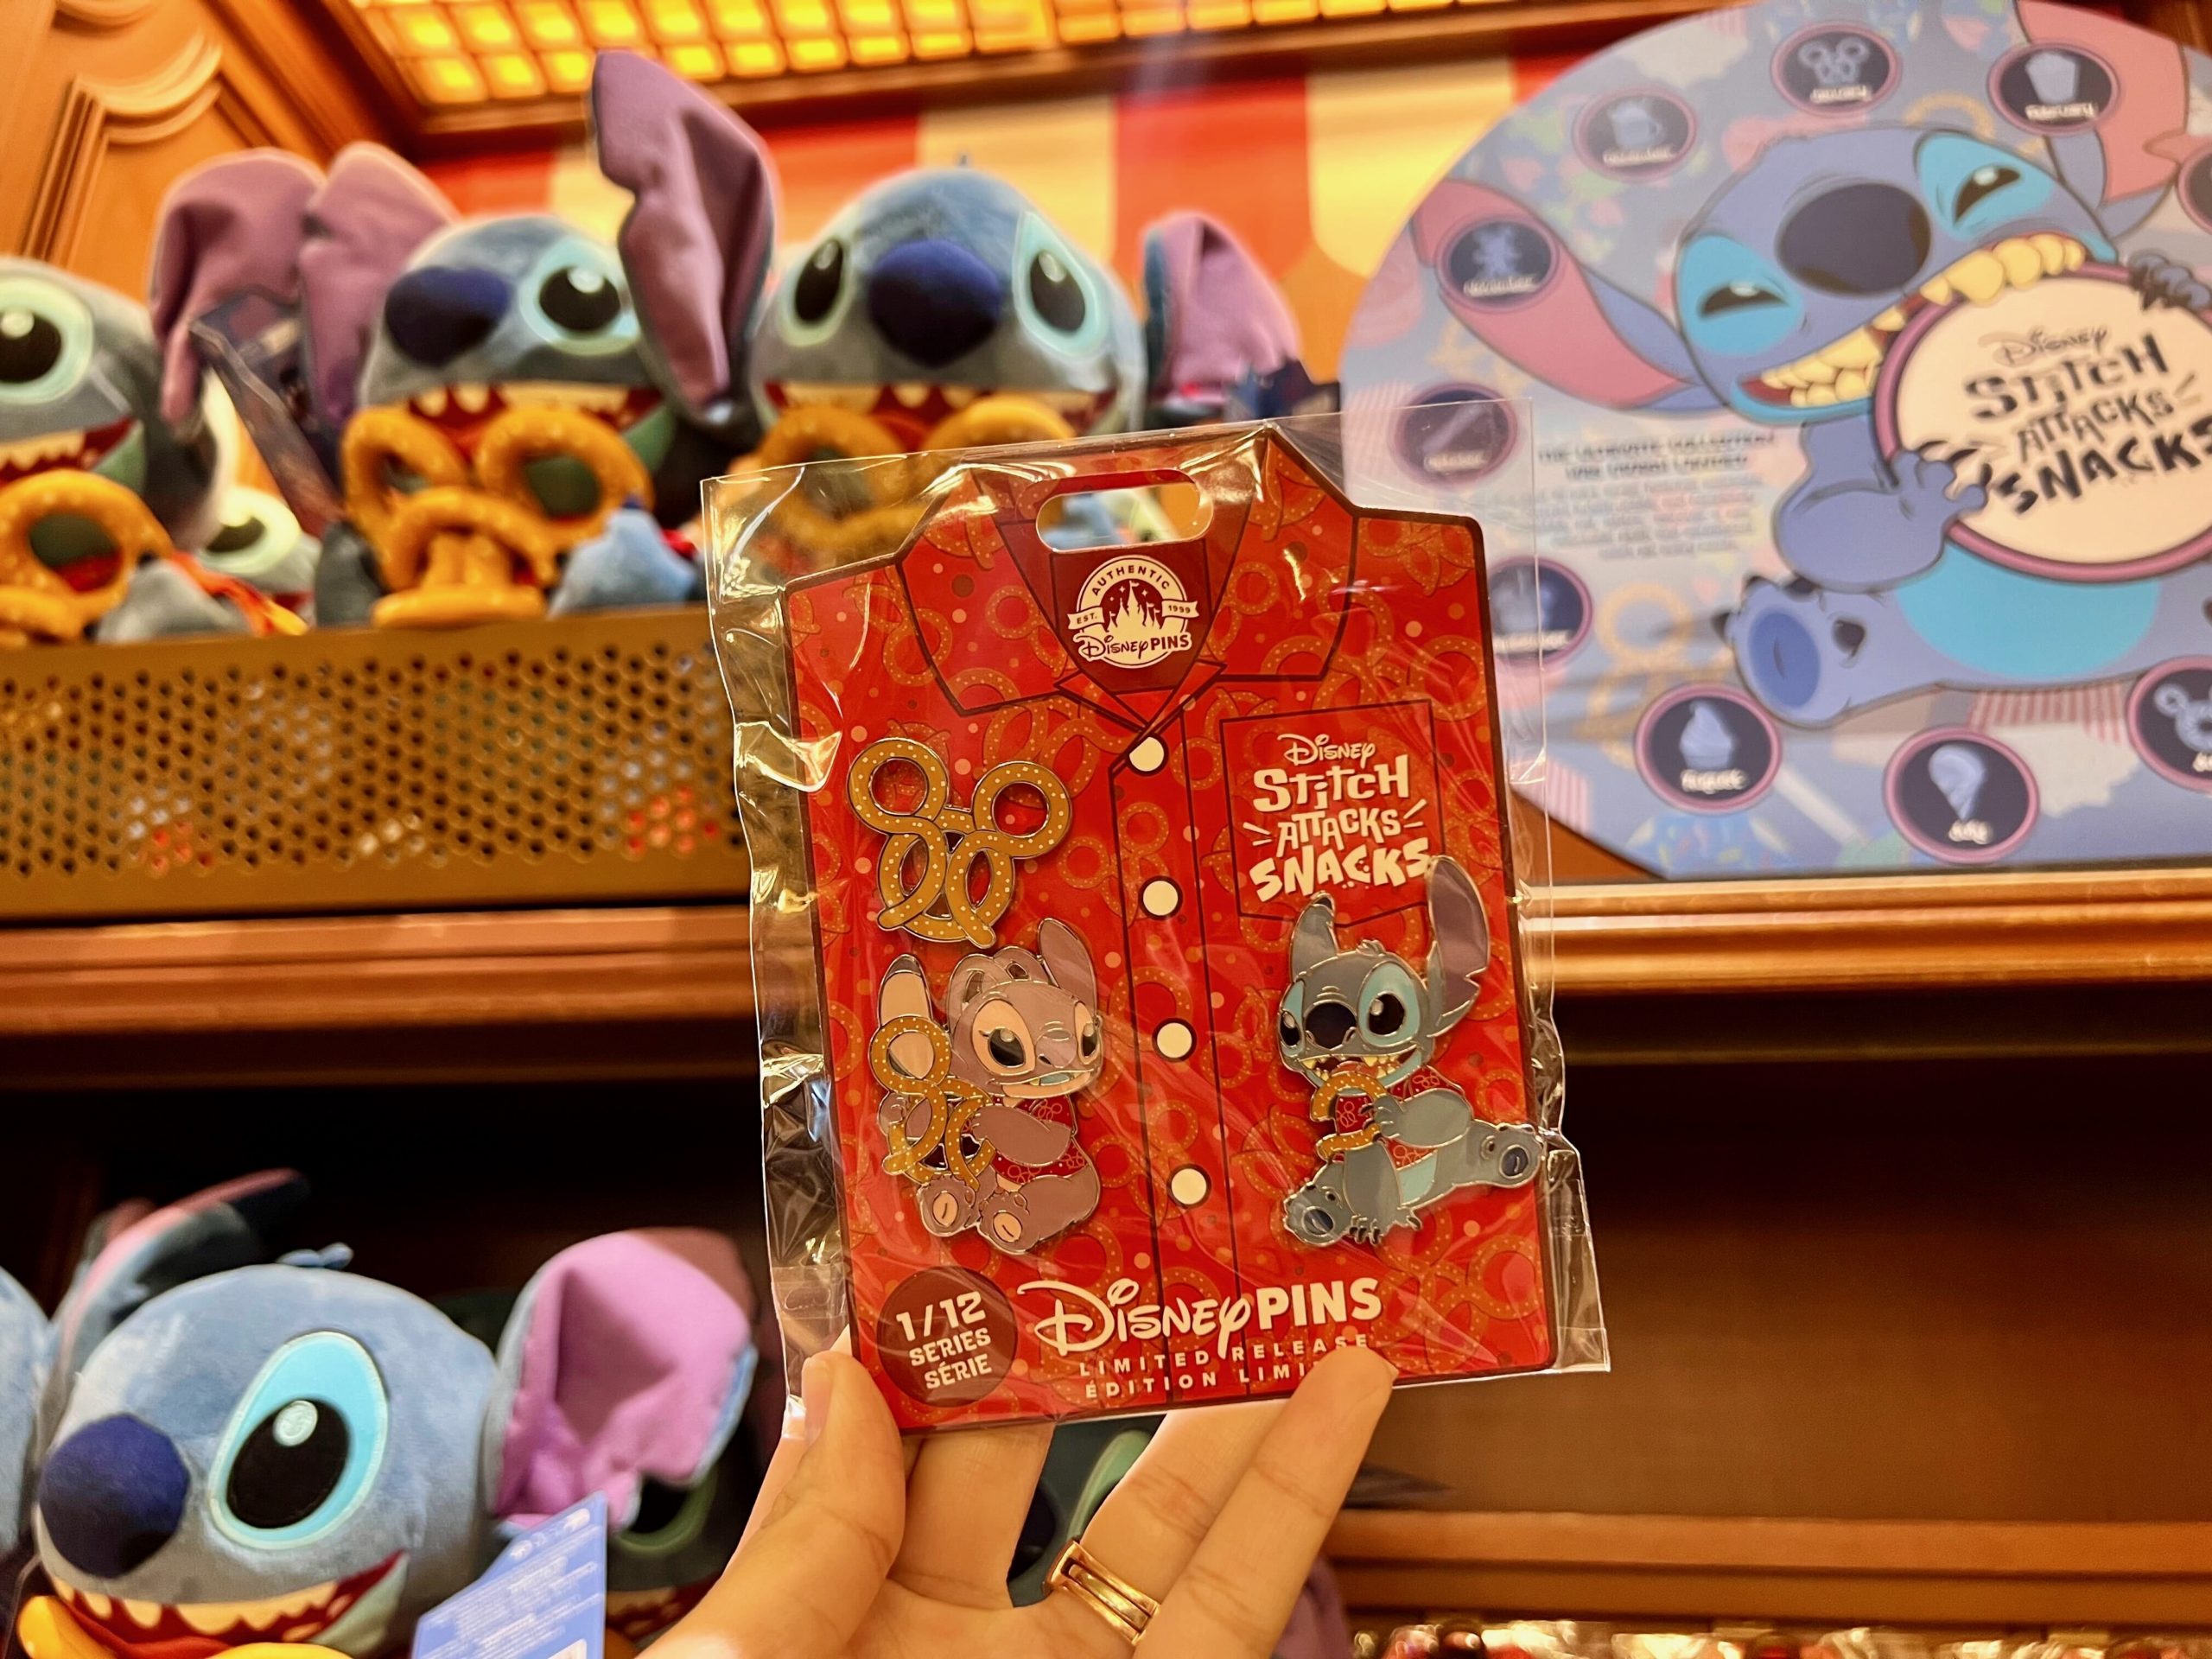 Stitch Attacks Snacks in His Monthly Merchandise Collection